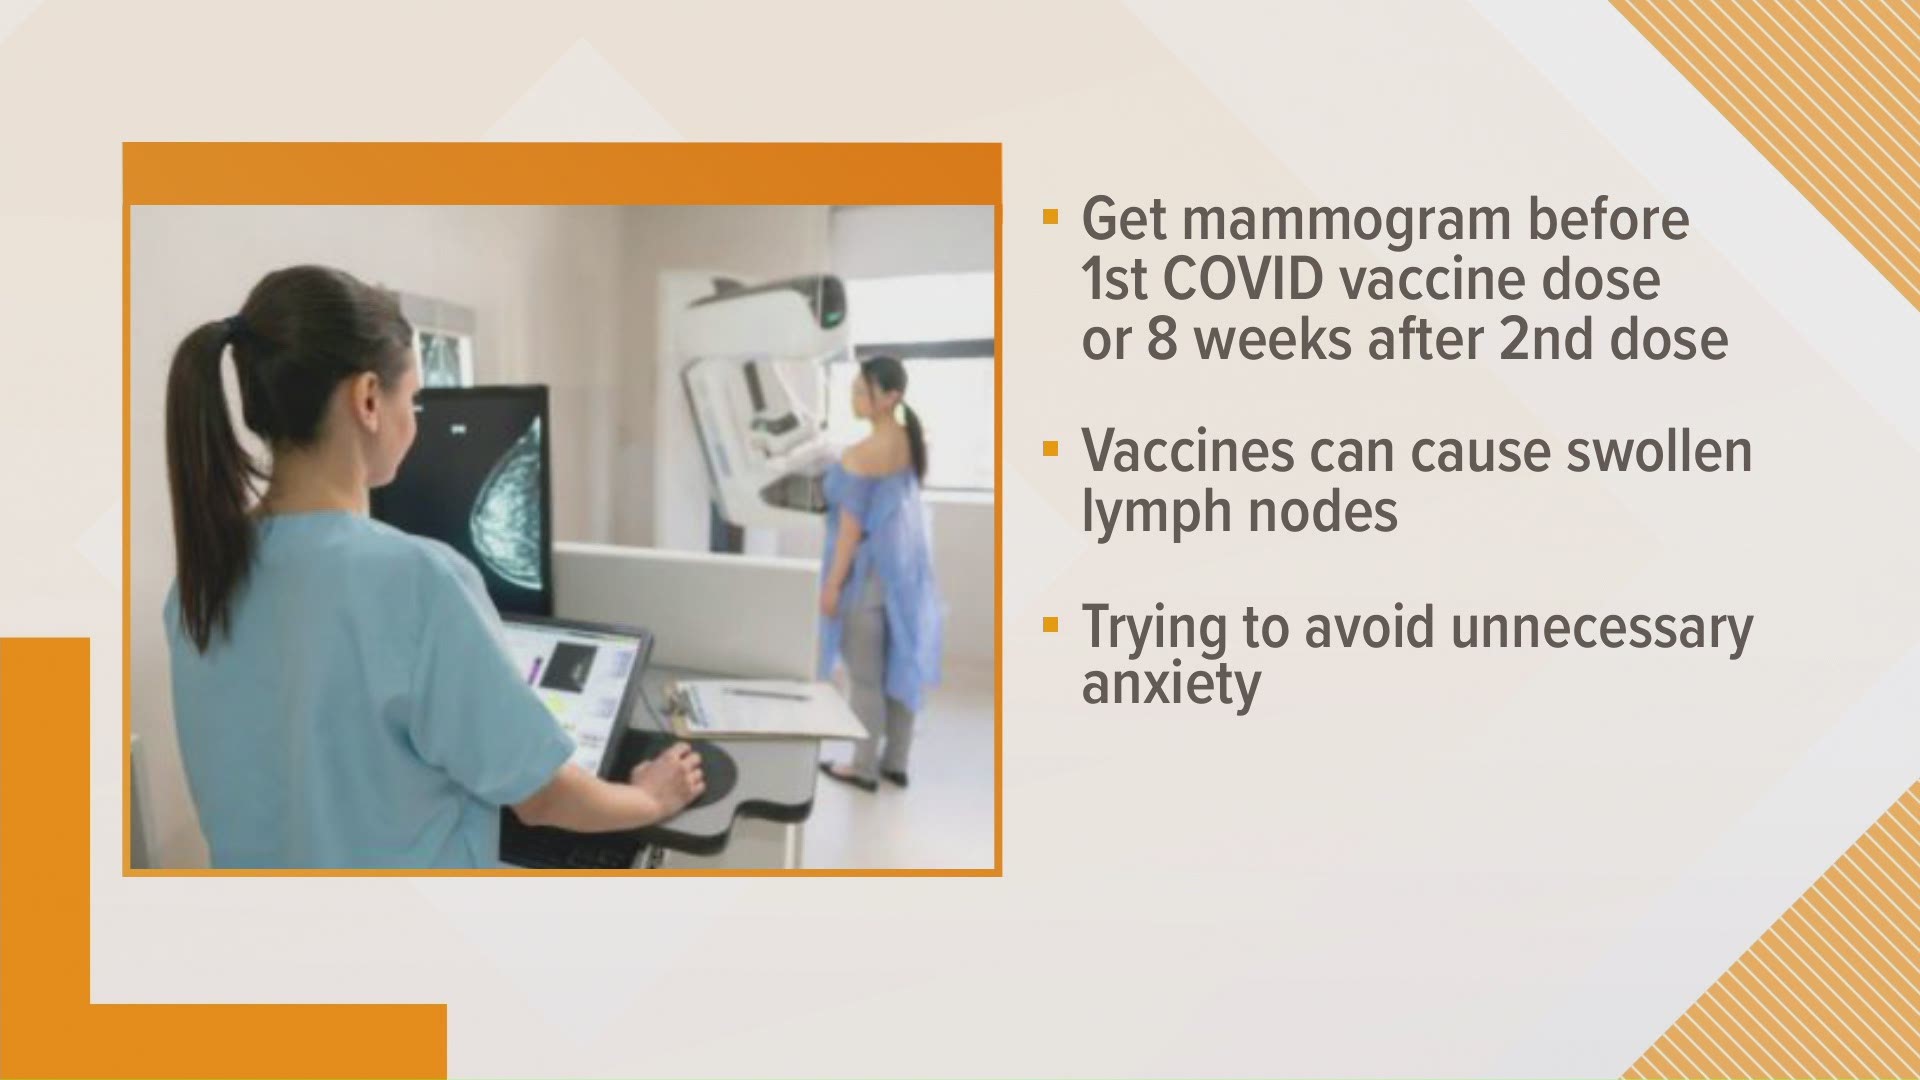 Vaccines can cause swollen lymph nodes, so doctors are making some recommendations when it comes to scheduling a mammogram around your vaccine appointment.